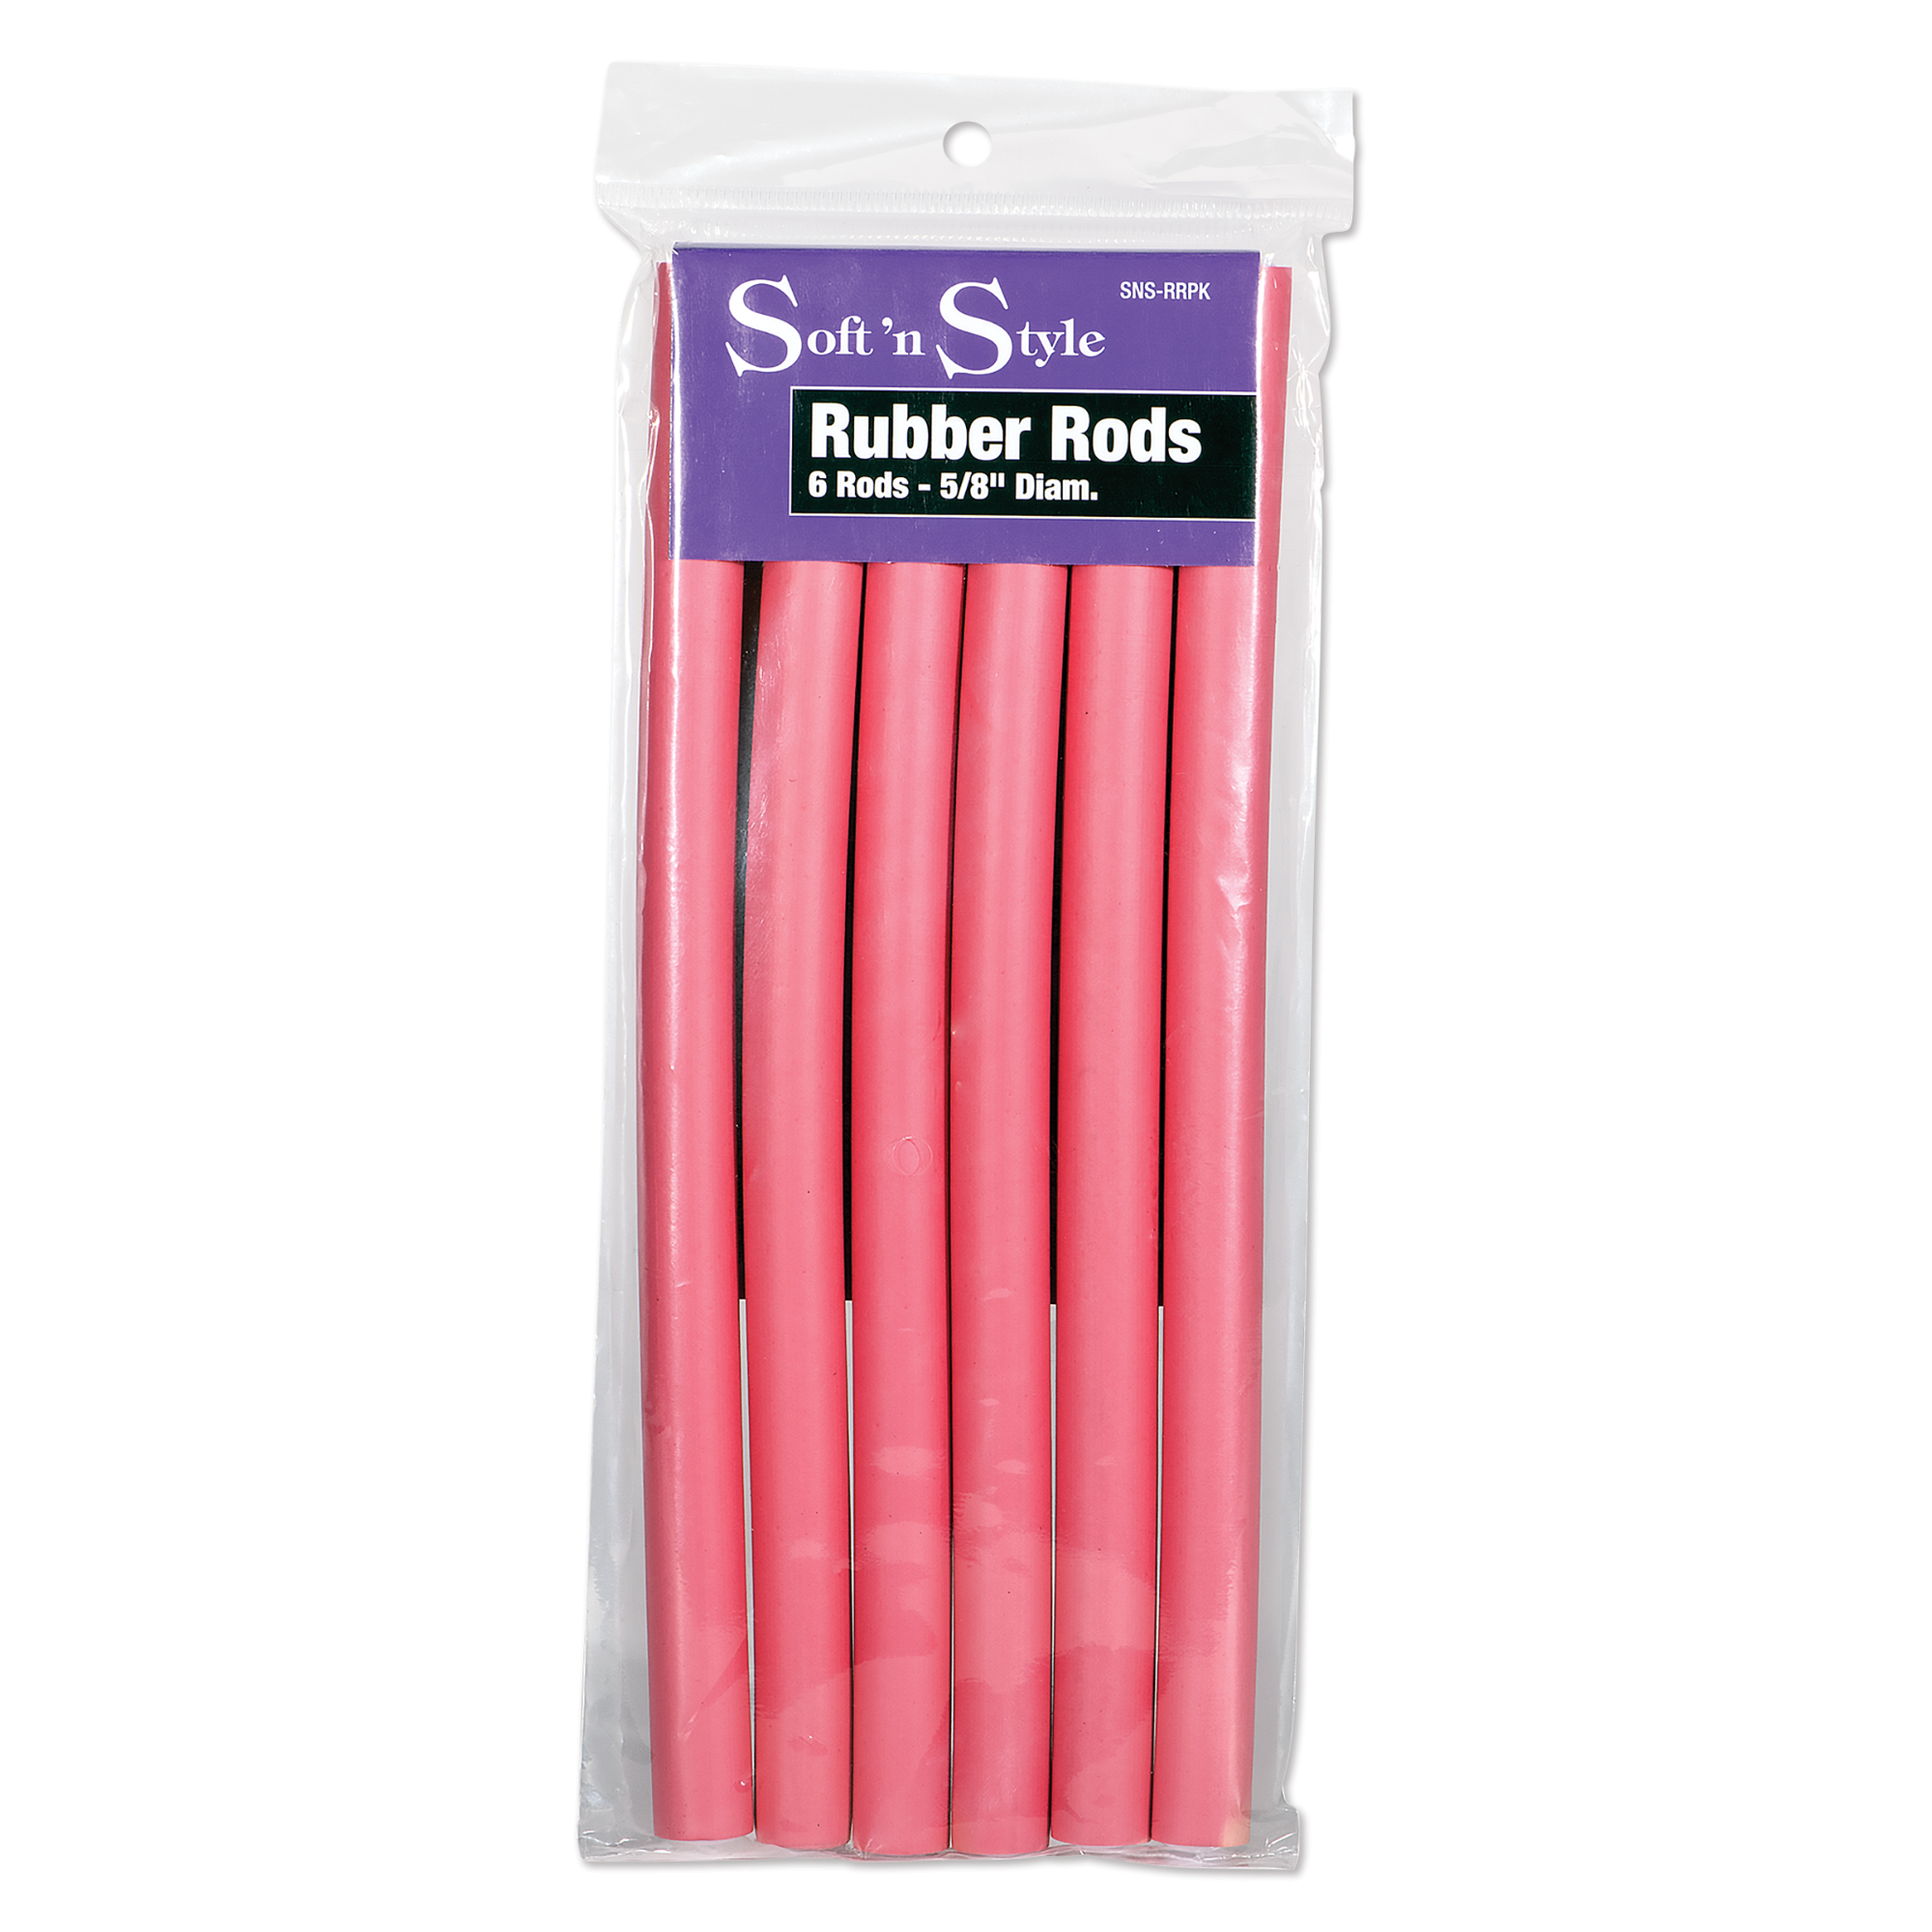 Rubber Rods, Long Pink - 5/8"